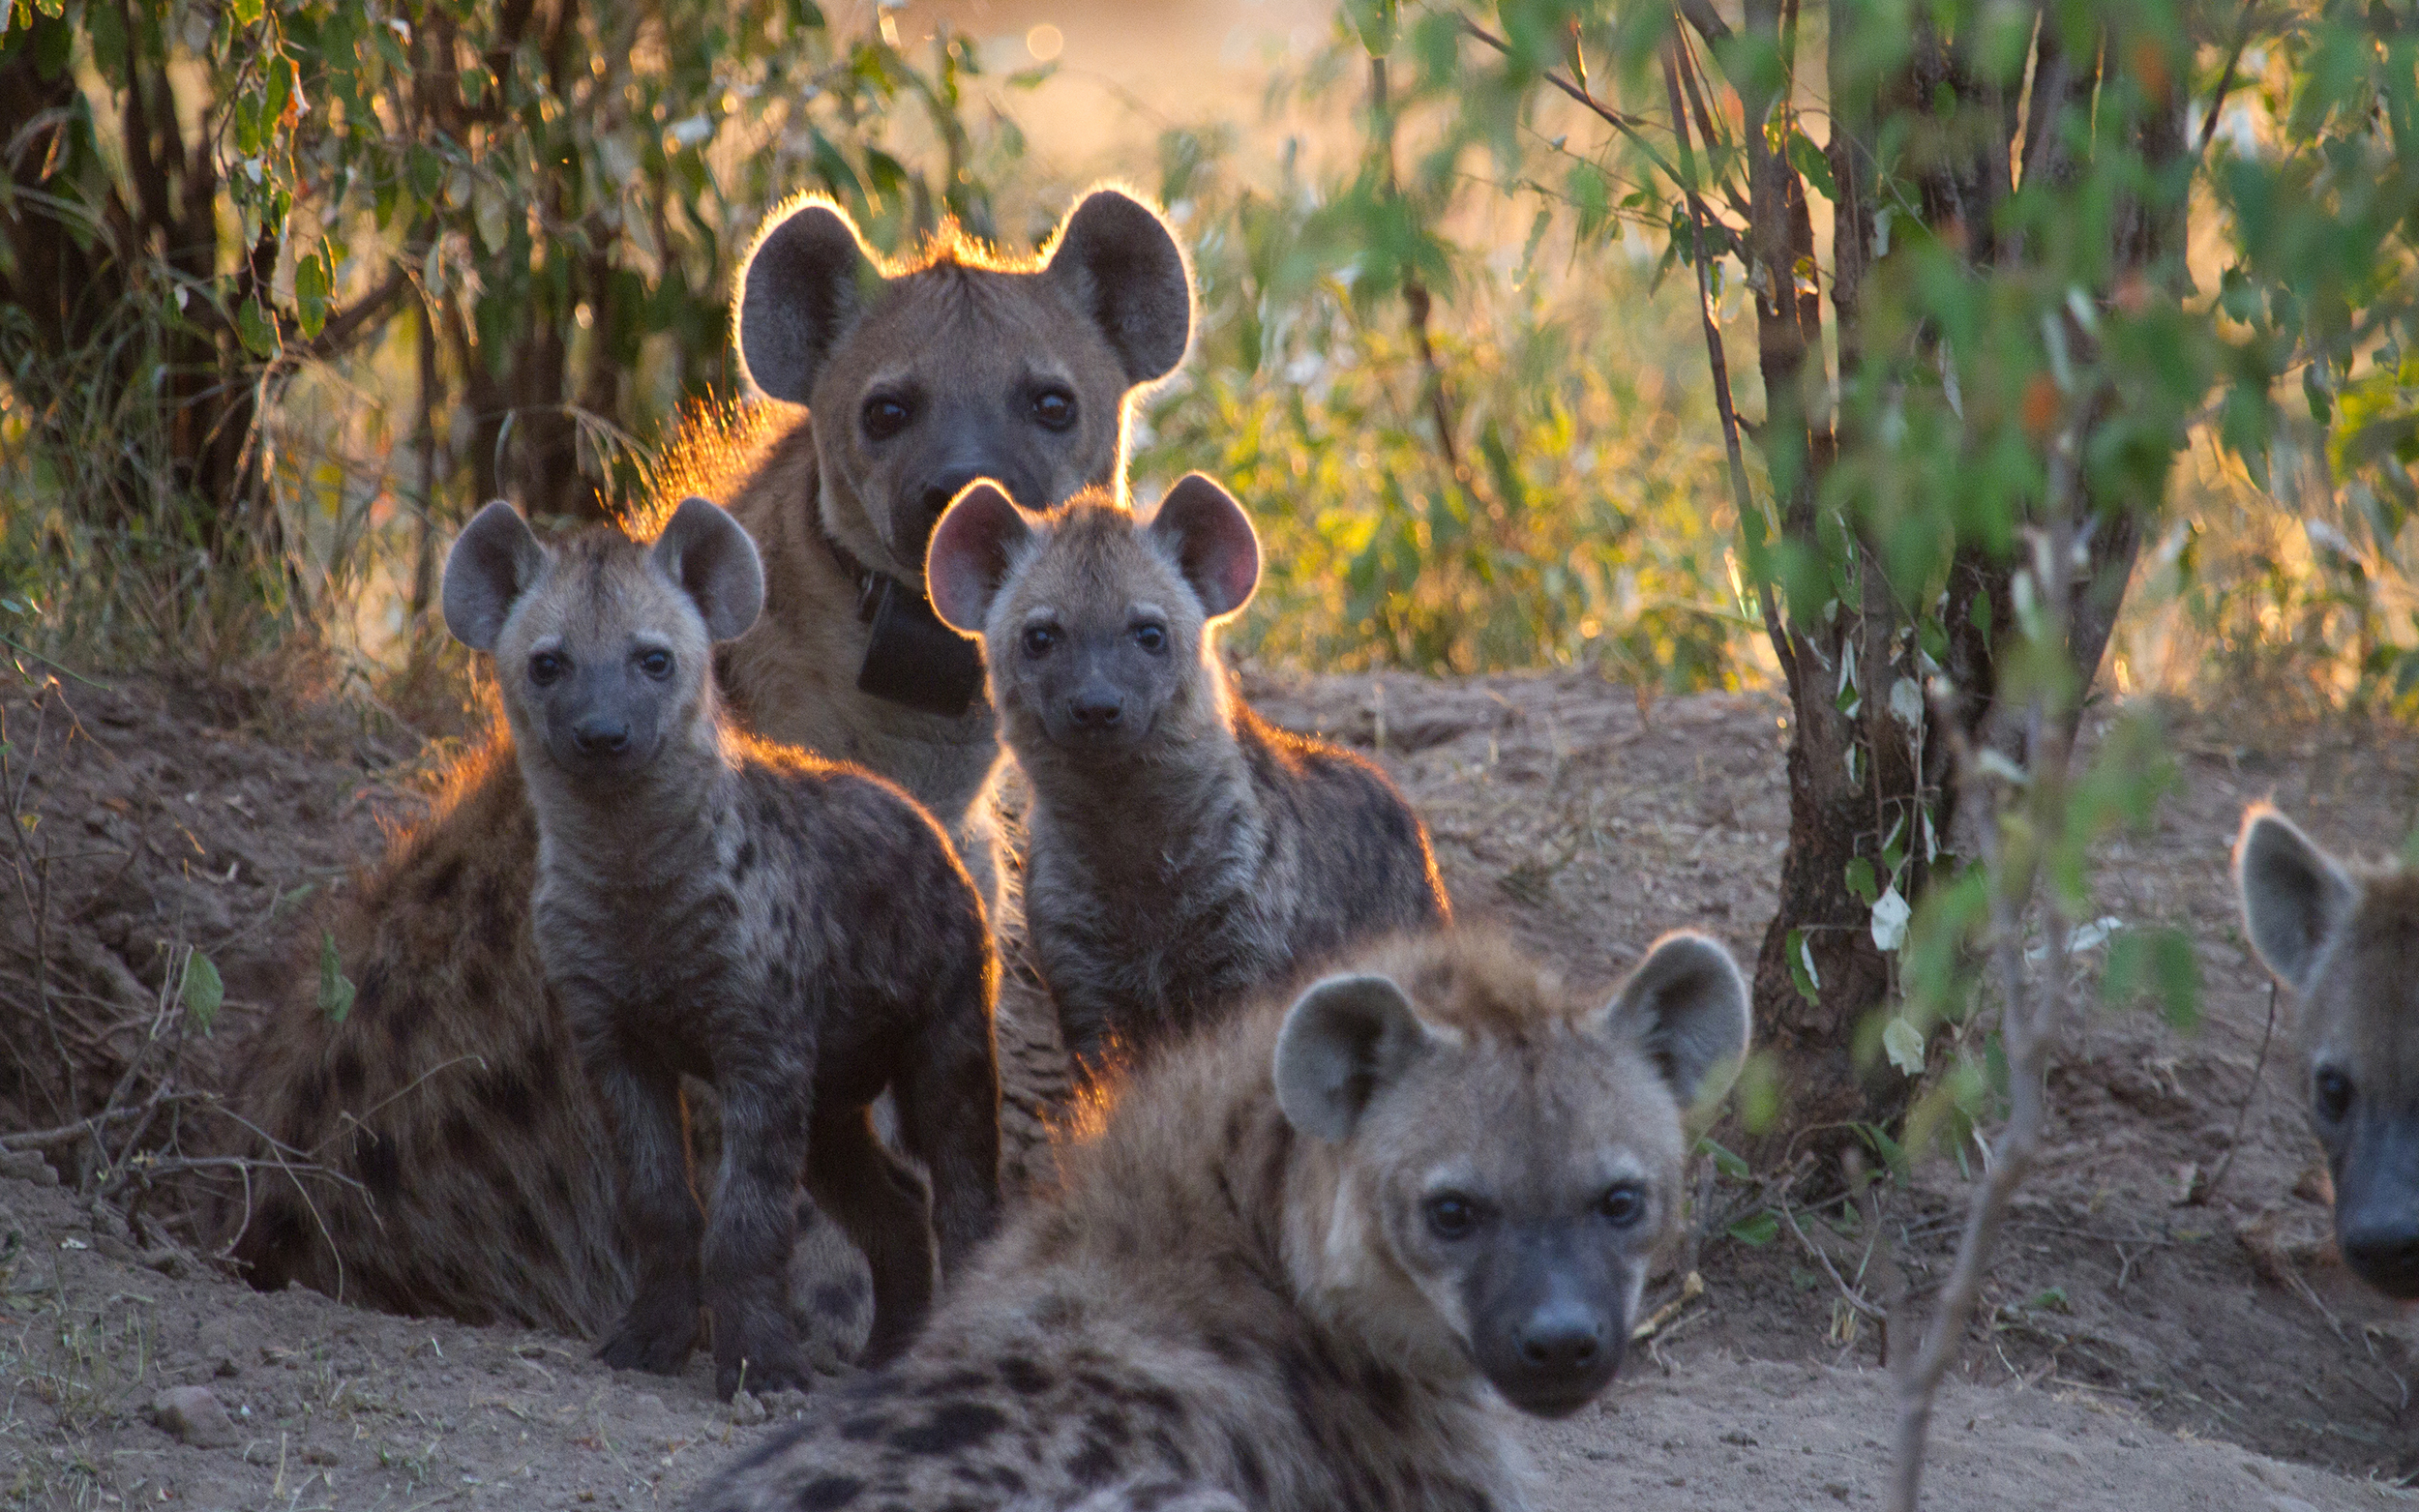 A spotted hyena mother rests behind three of her cubs.